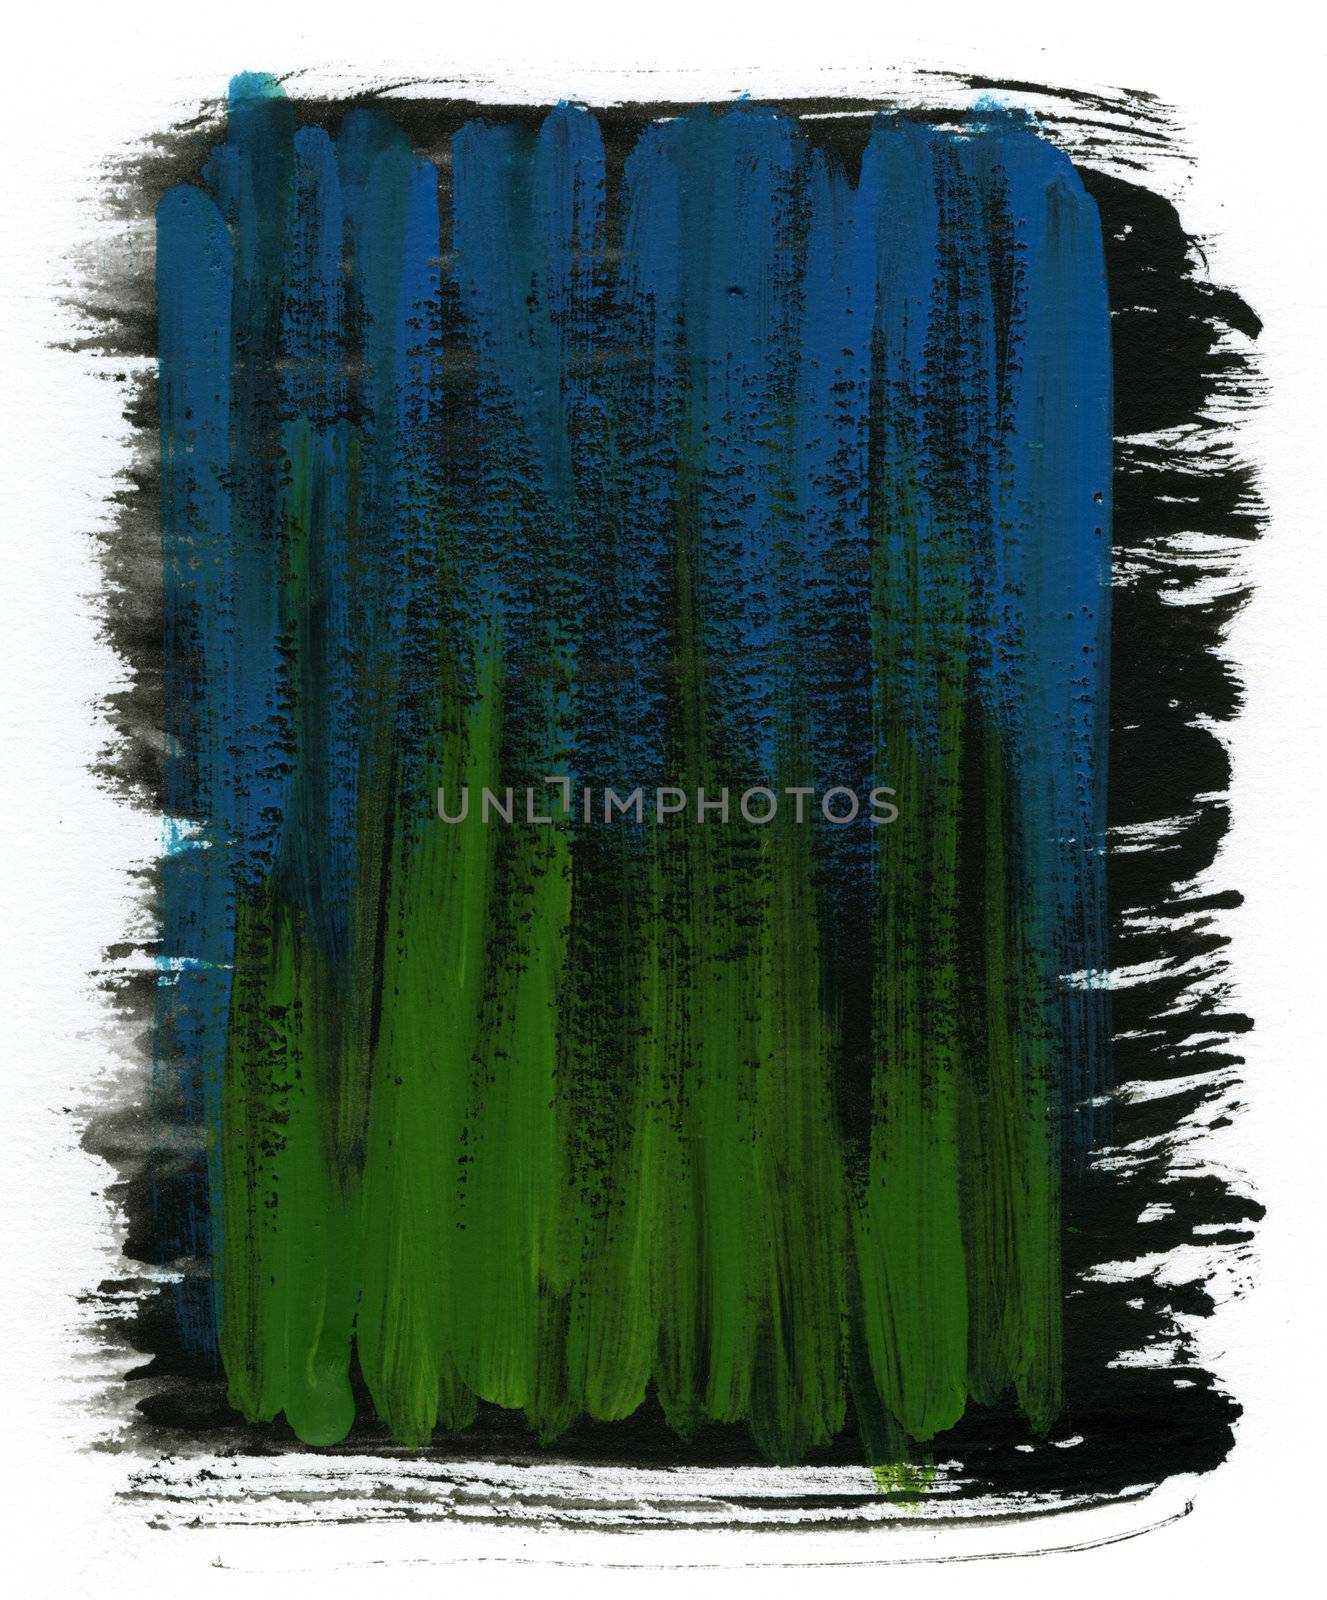 green, blue and black abstract watercolor background with rough edges on white paper